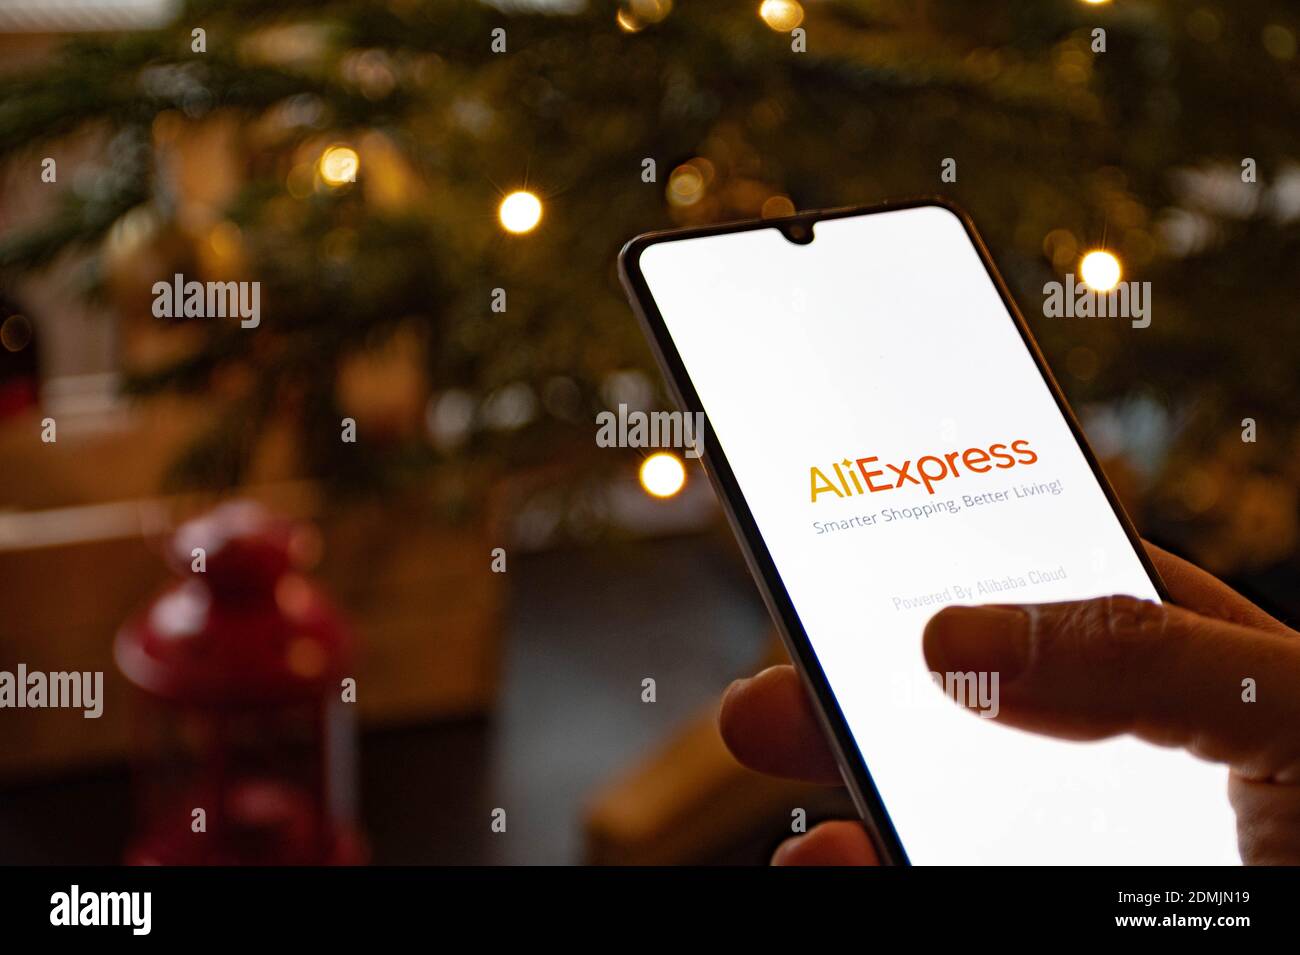 AliExpress app on the smartphone with Christmas background, shopping on line, online retail service based in China owned by the Alibaba Group Stock Photo